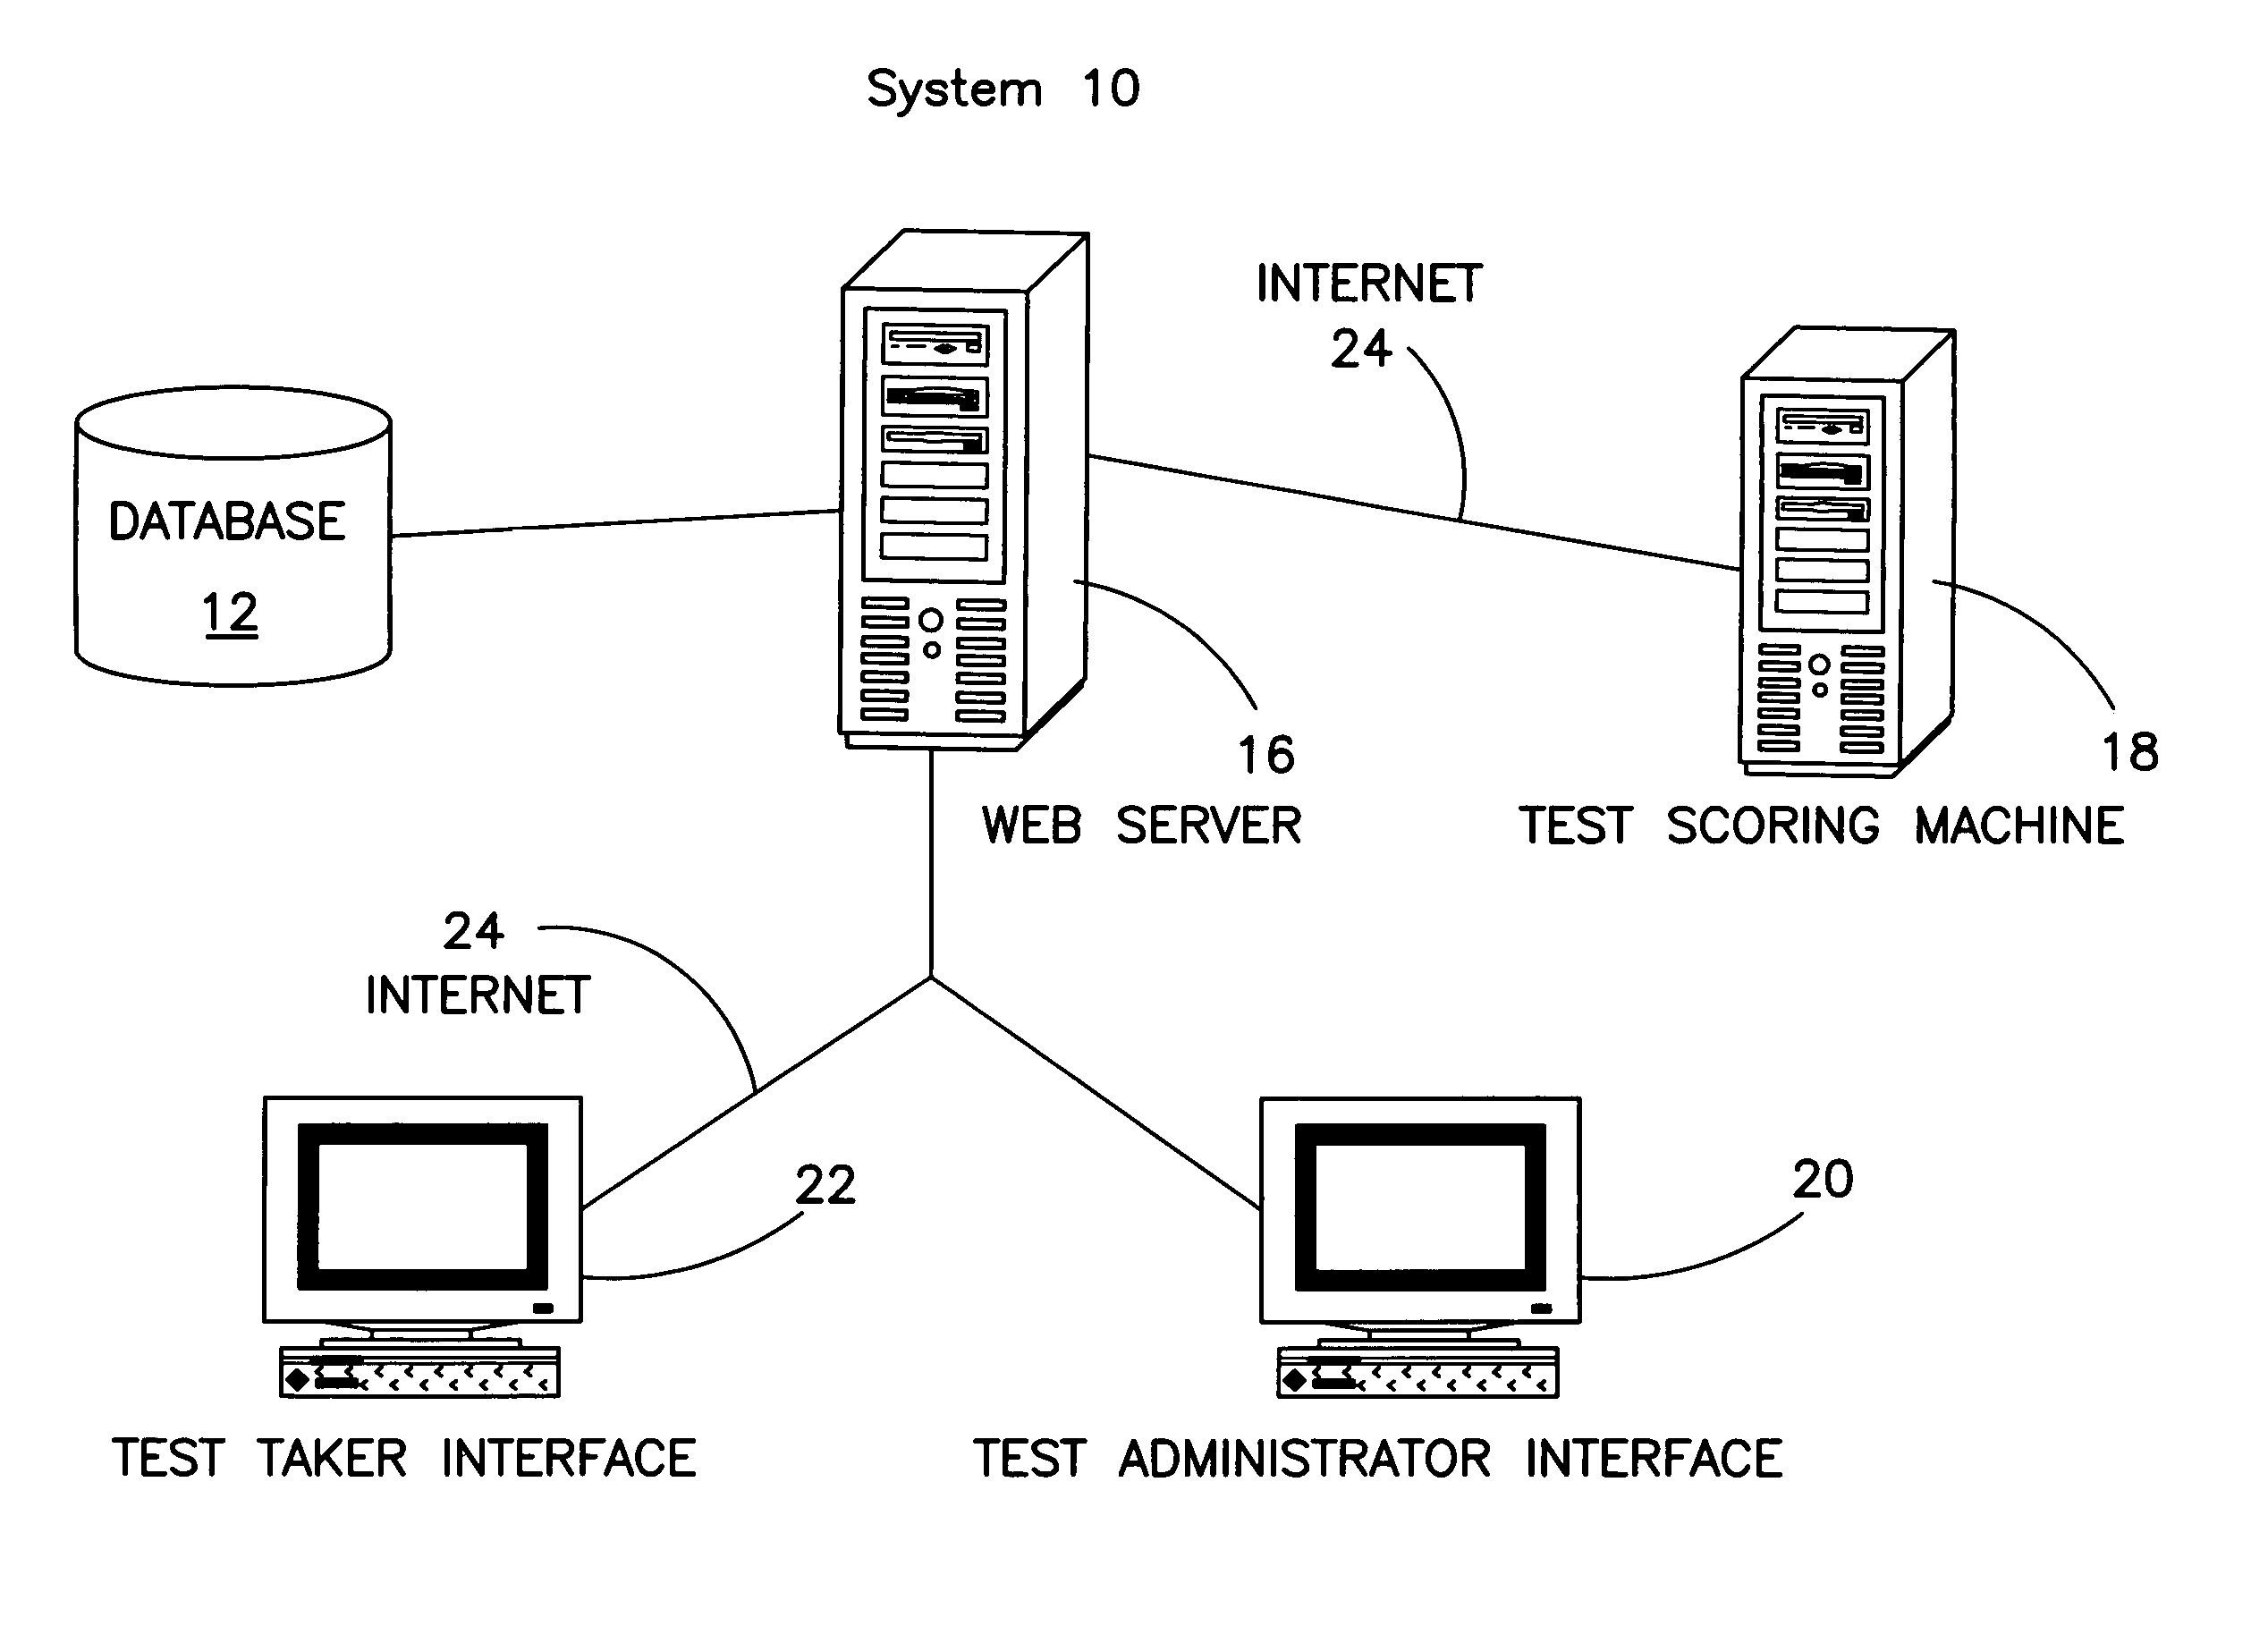 Test administration system using the internet